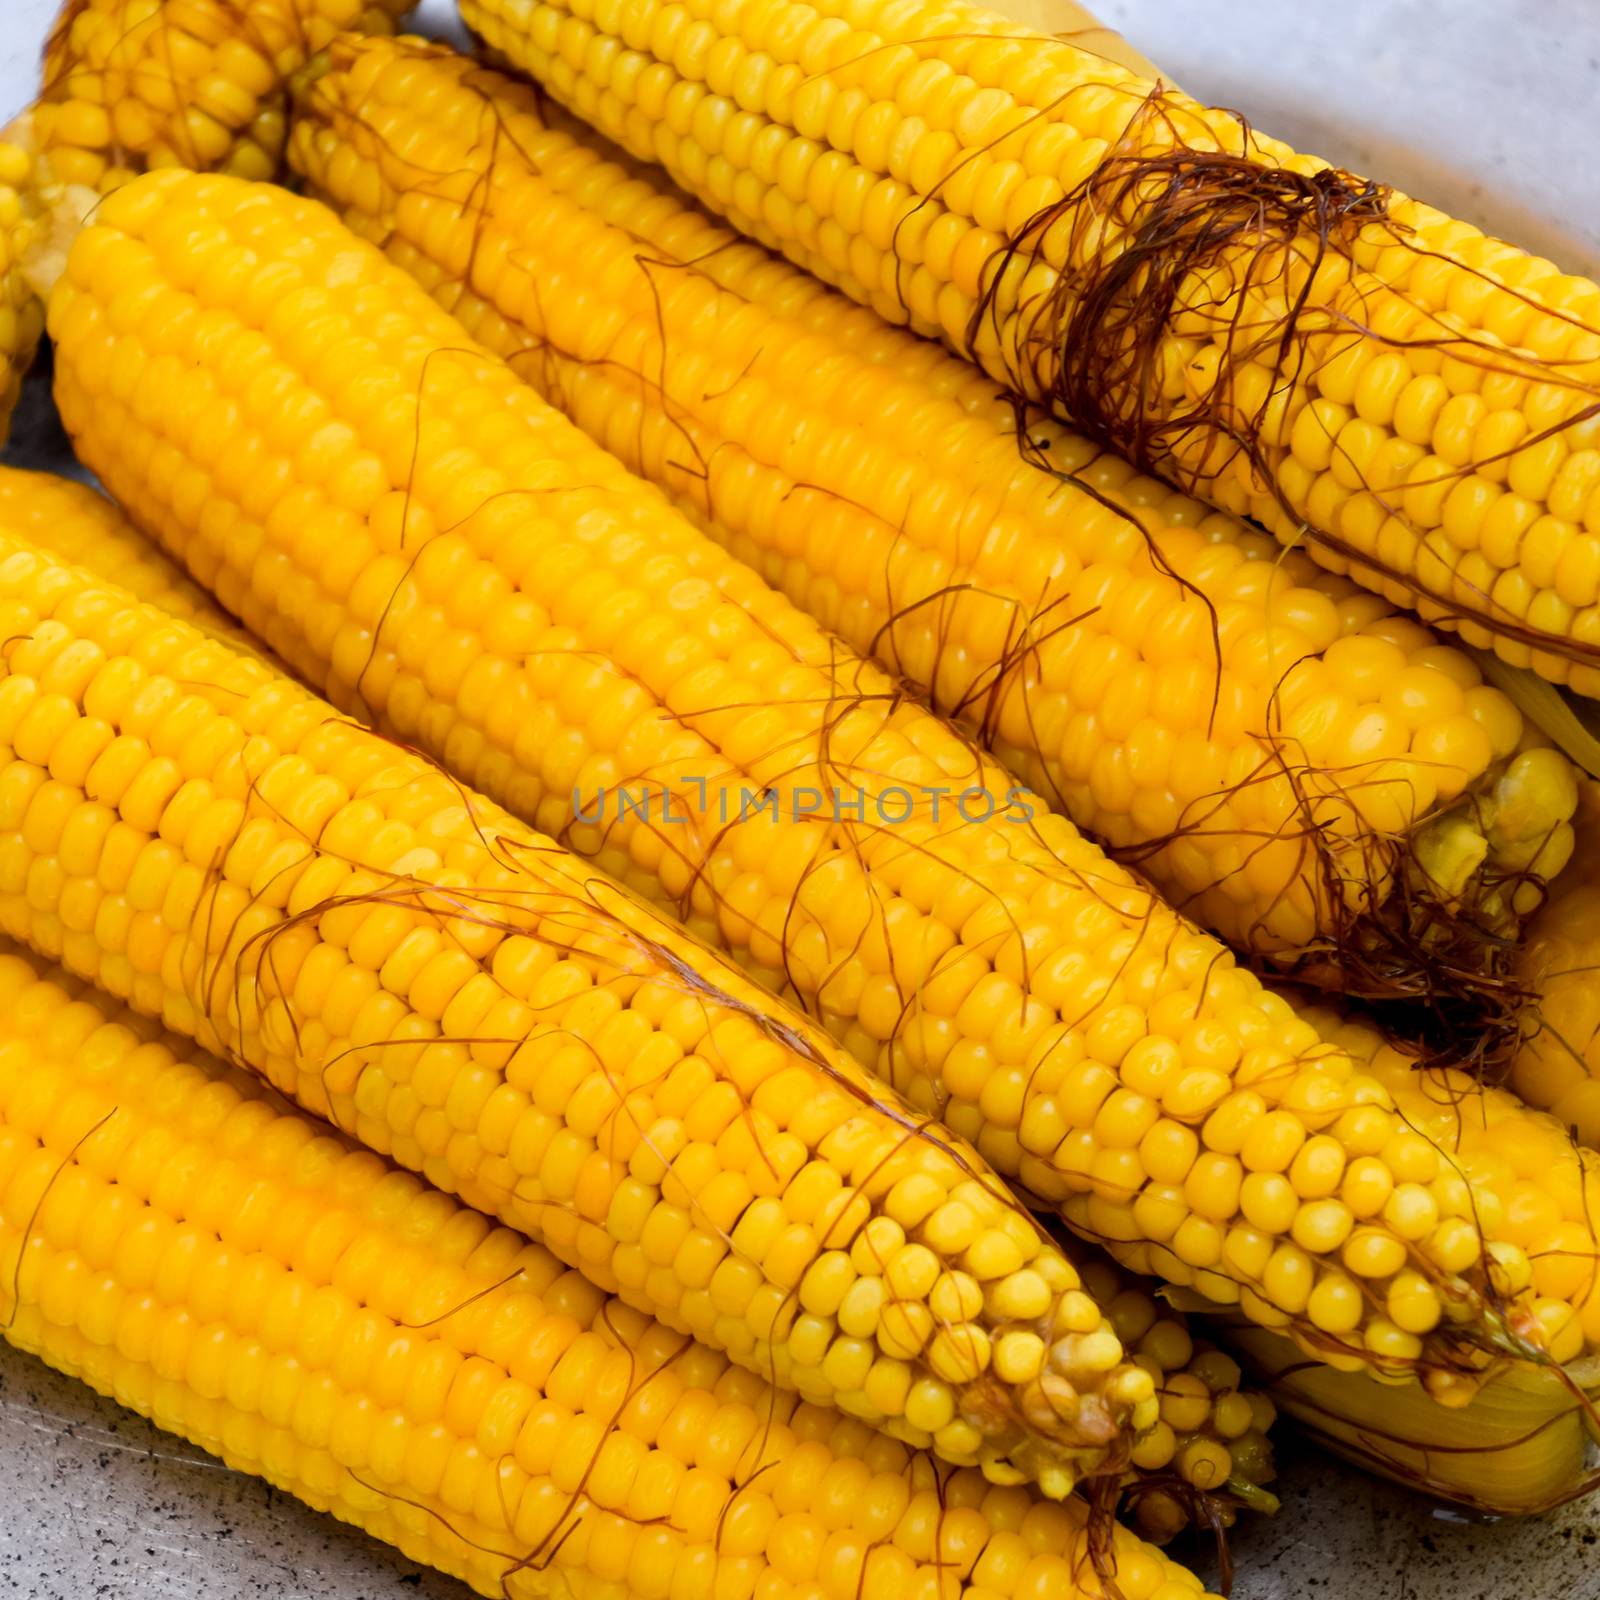 Boiled corn on an aluminum tray. Corn near. Closeup of corn. Yellow boiled young corn, useful and tasty food